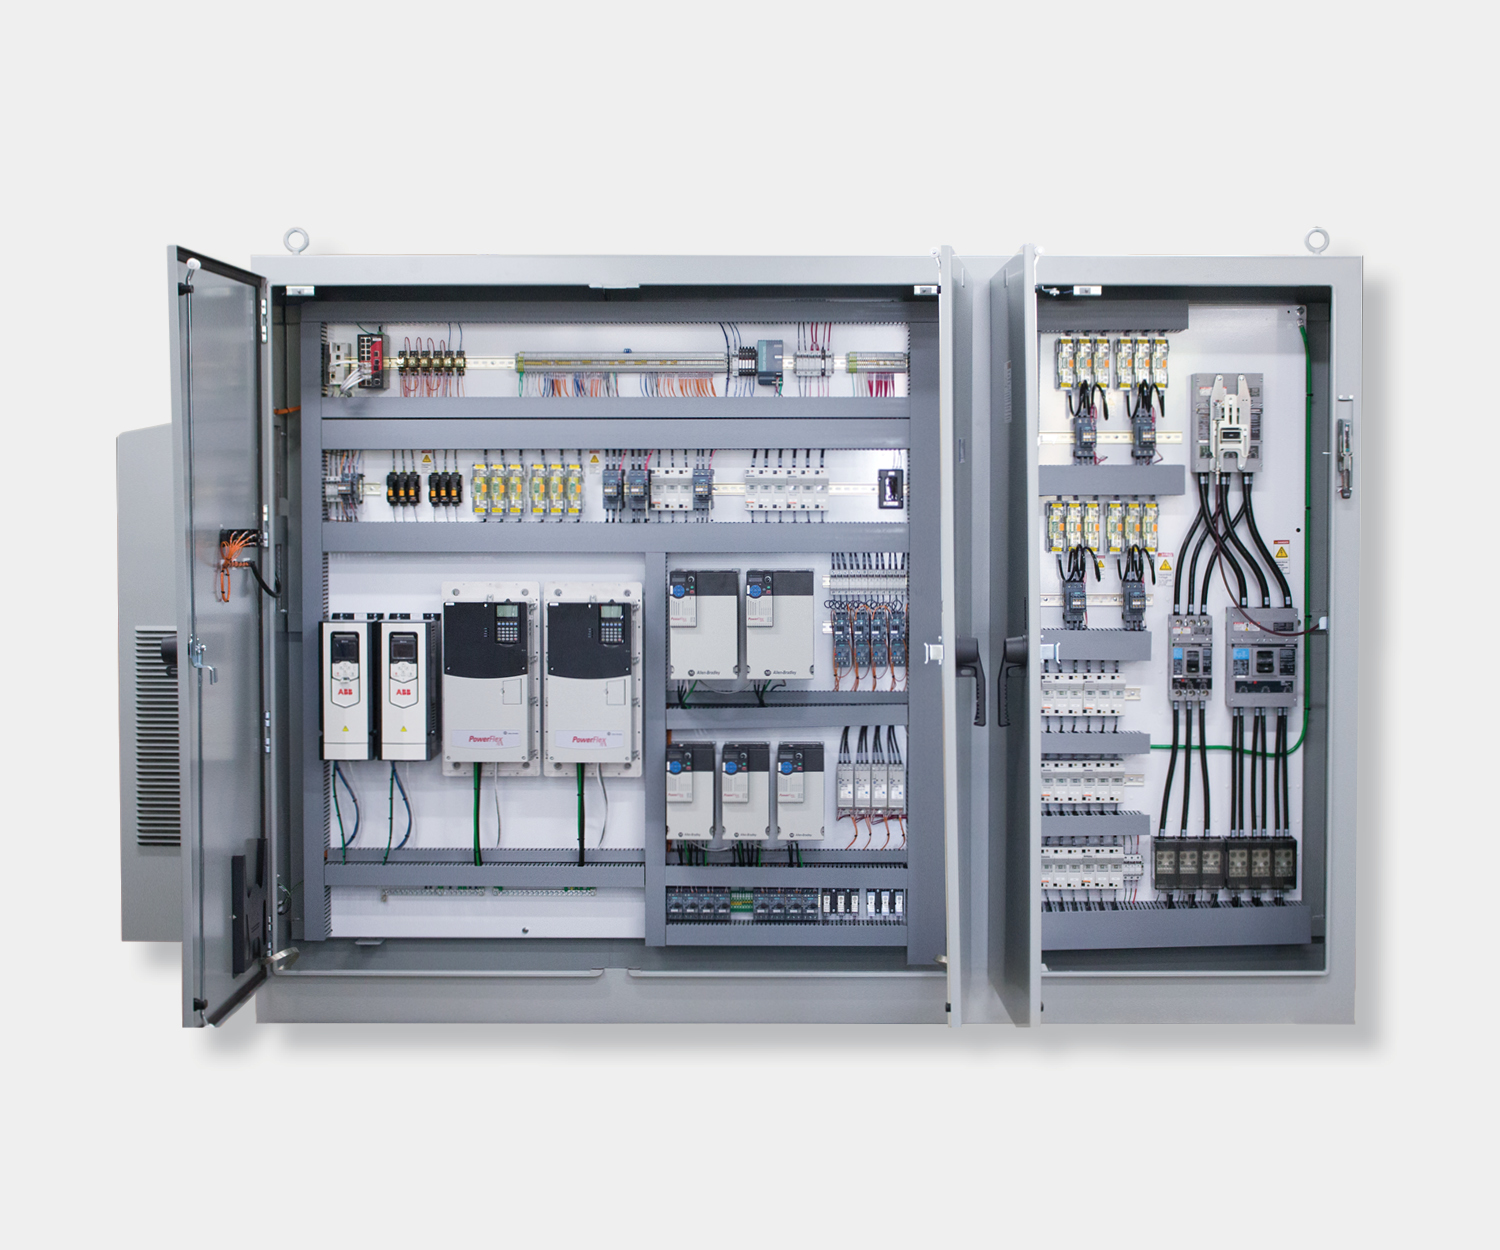 Three Door VFD control panel with remote I/O and a disconnect switch